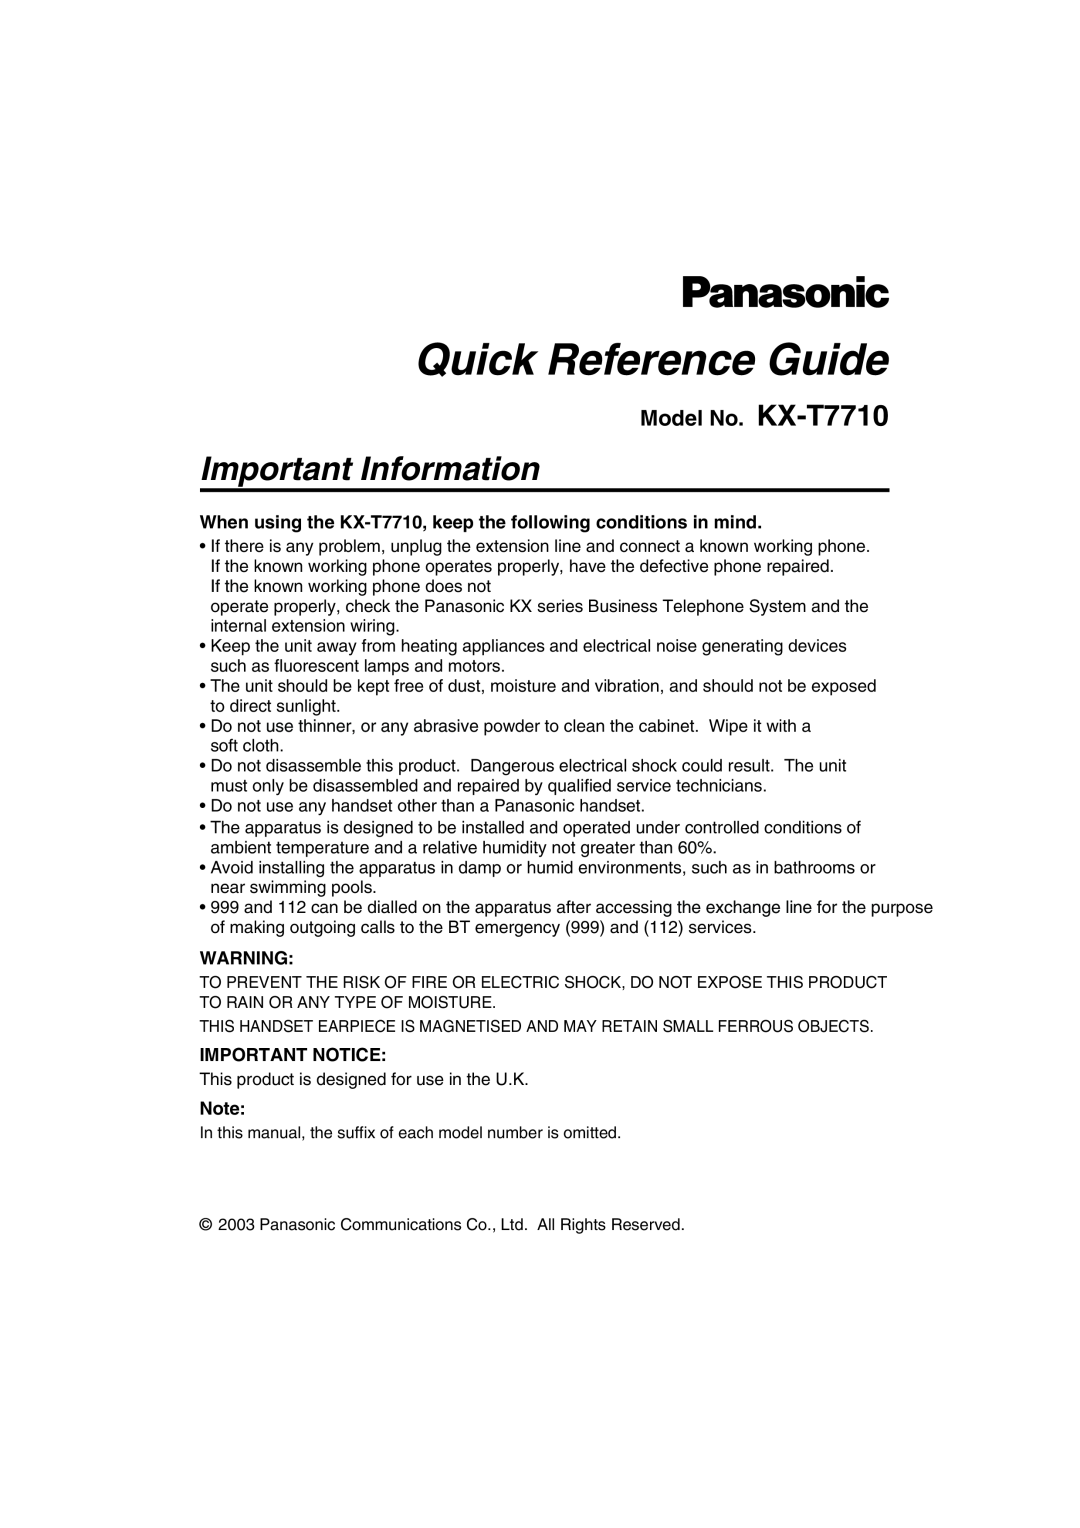 Panasonic manual Important Information, Model No. KX-T7710, Quick Reference Guide, Important Notice 